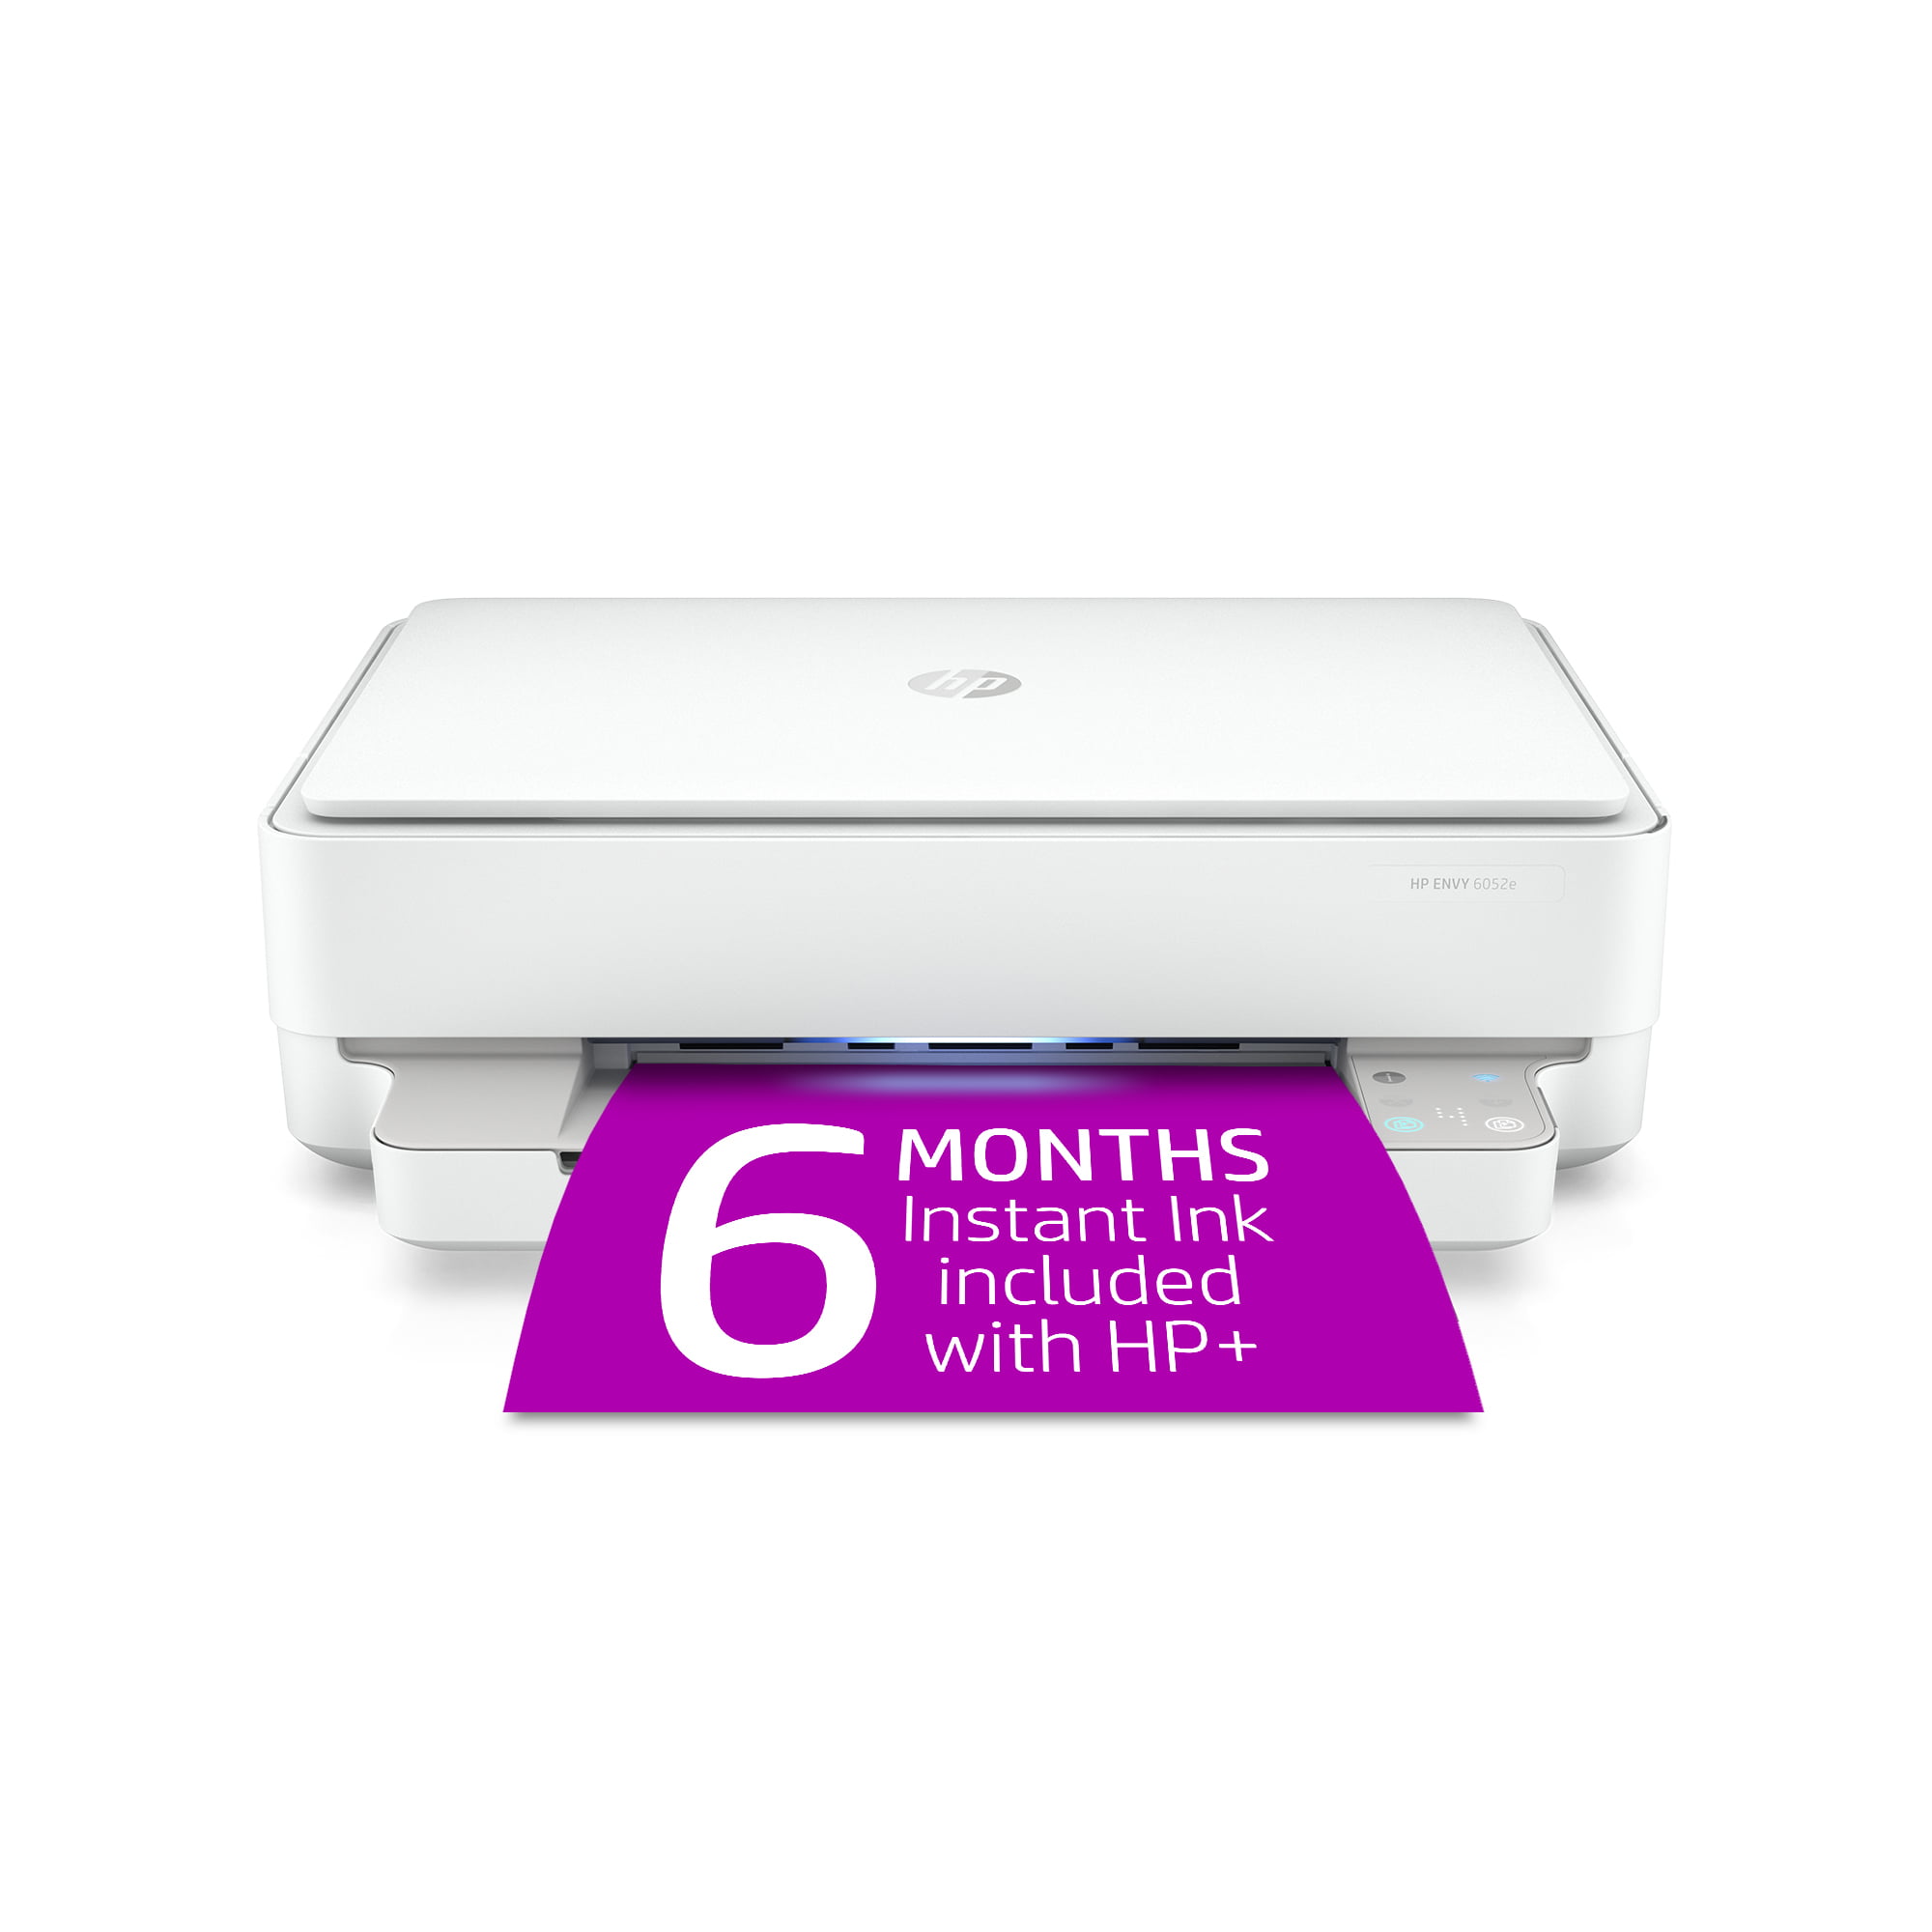 6452e All-in-One Wireless Color Inkjet Printer 6 Months Instant Ink Included HP+ - Walmart.com